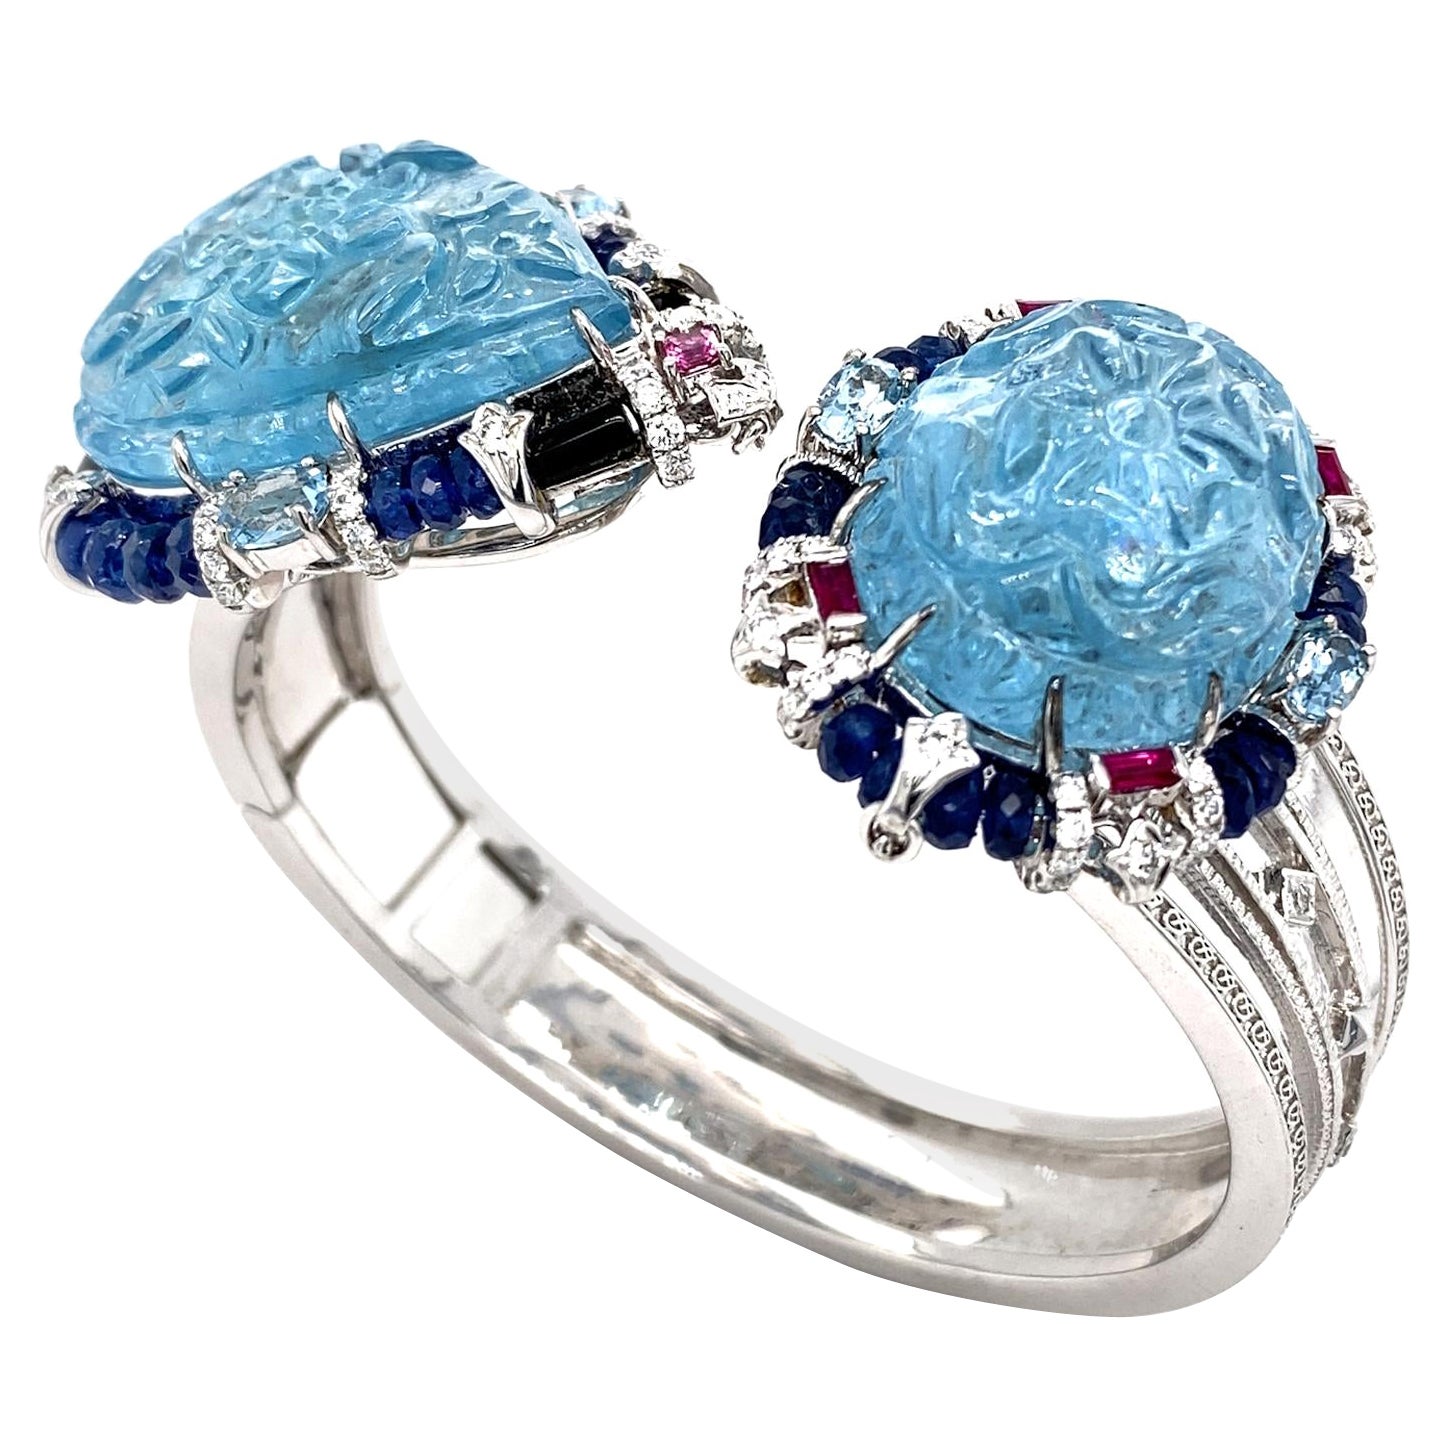 Oceanic Blooms 4-in-1 Transformable Carved Aquamarine Bangle Set by Dilys'